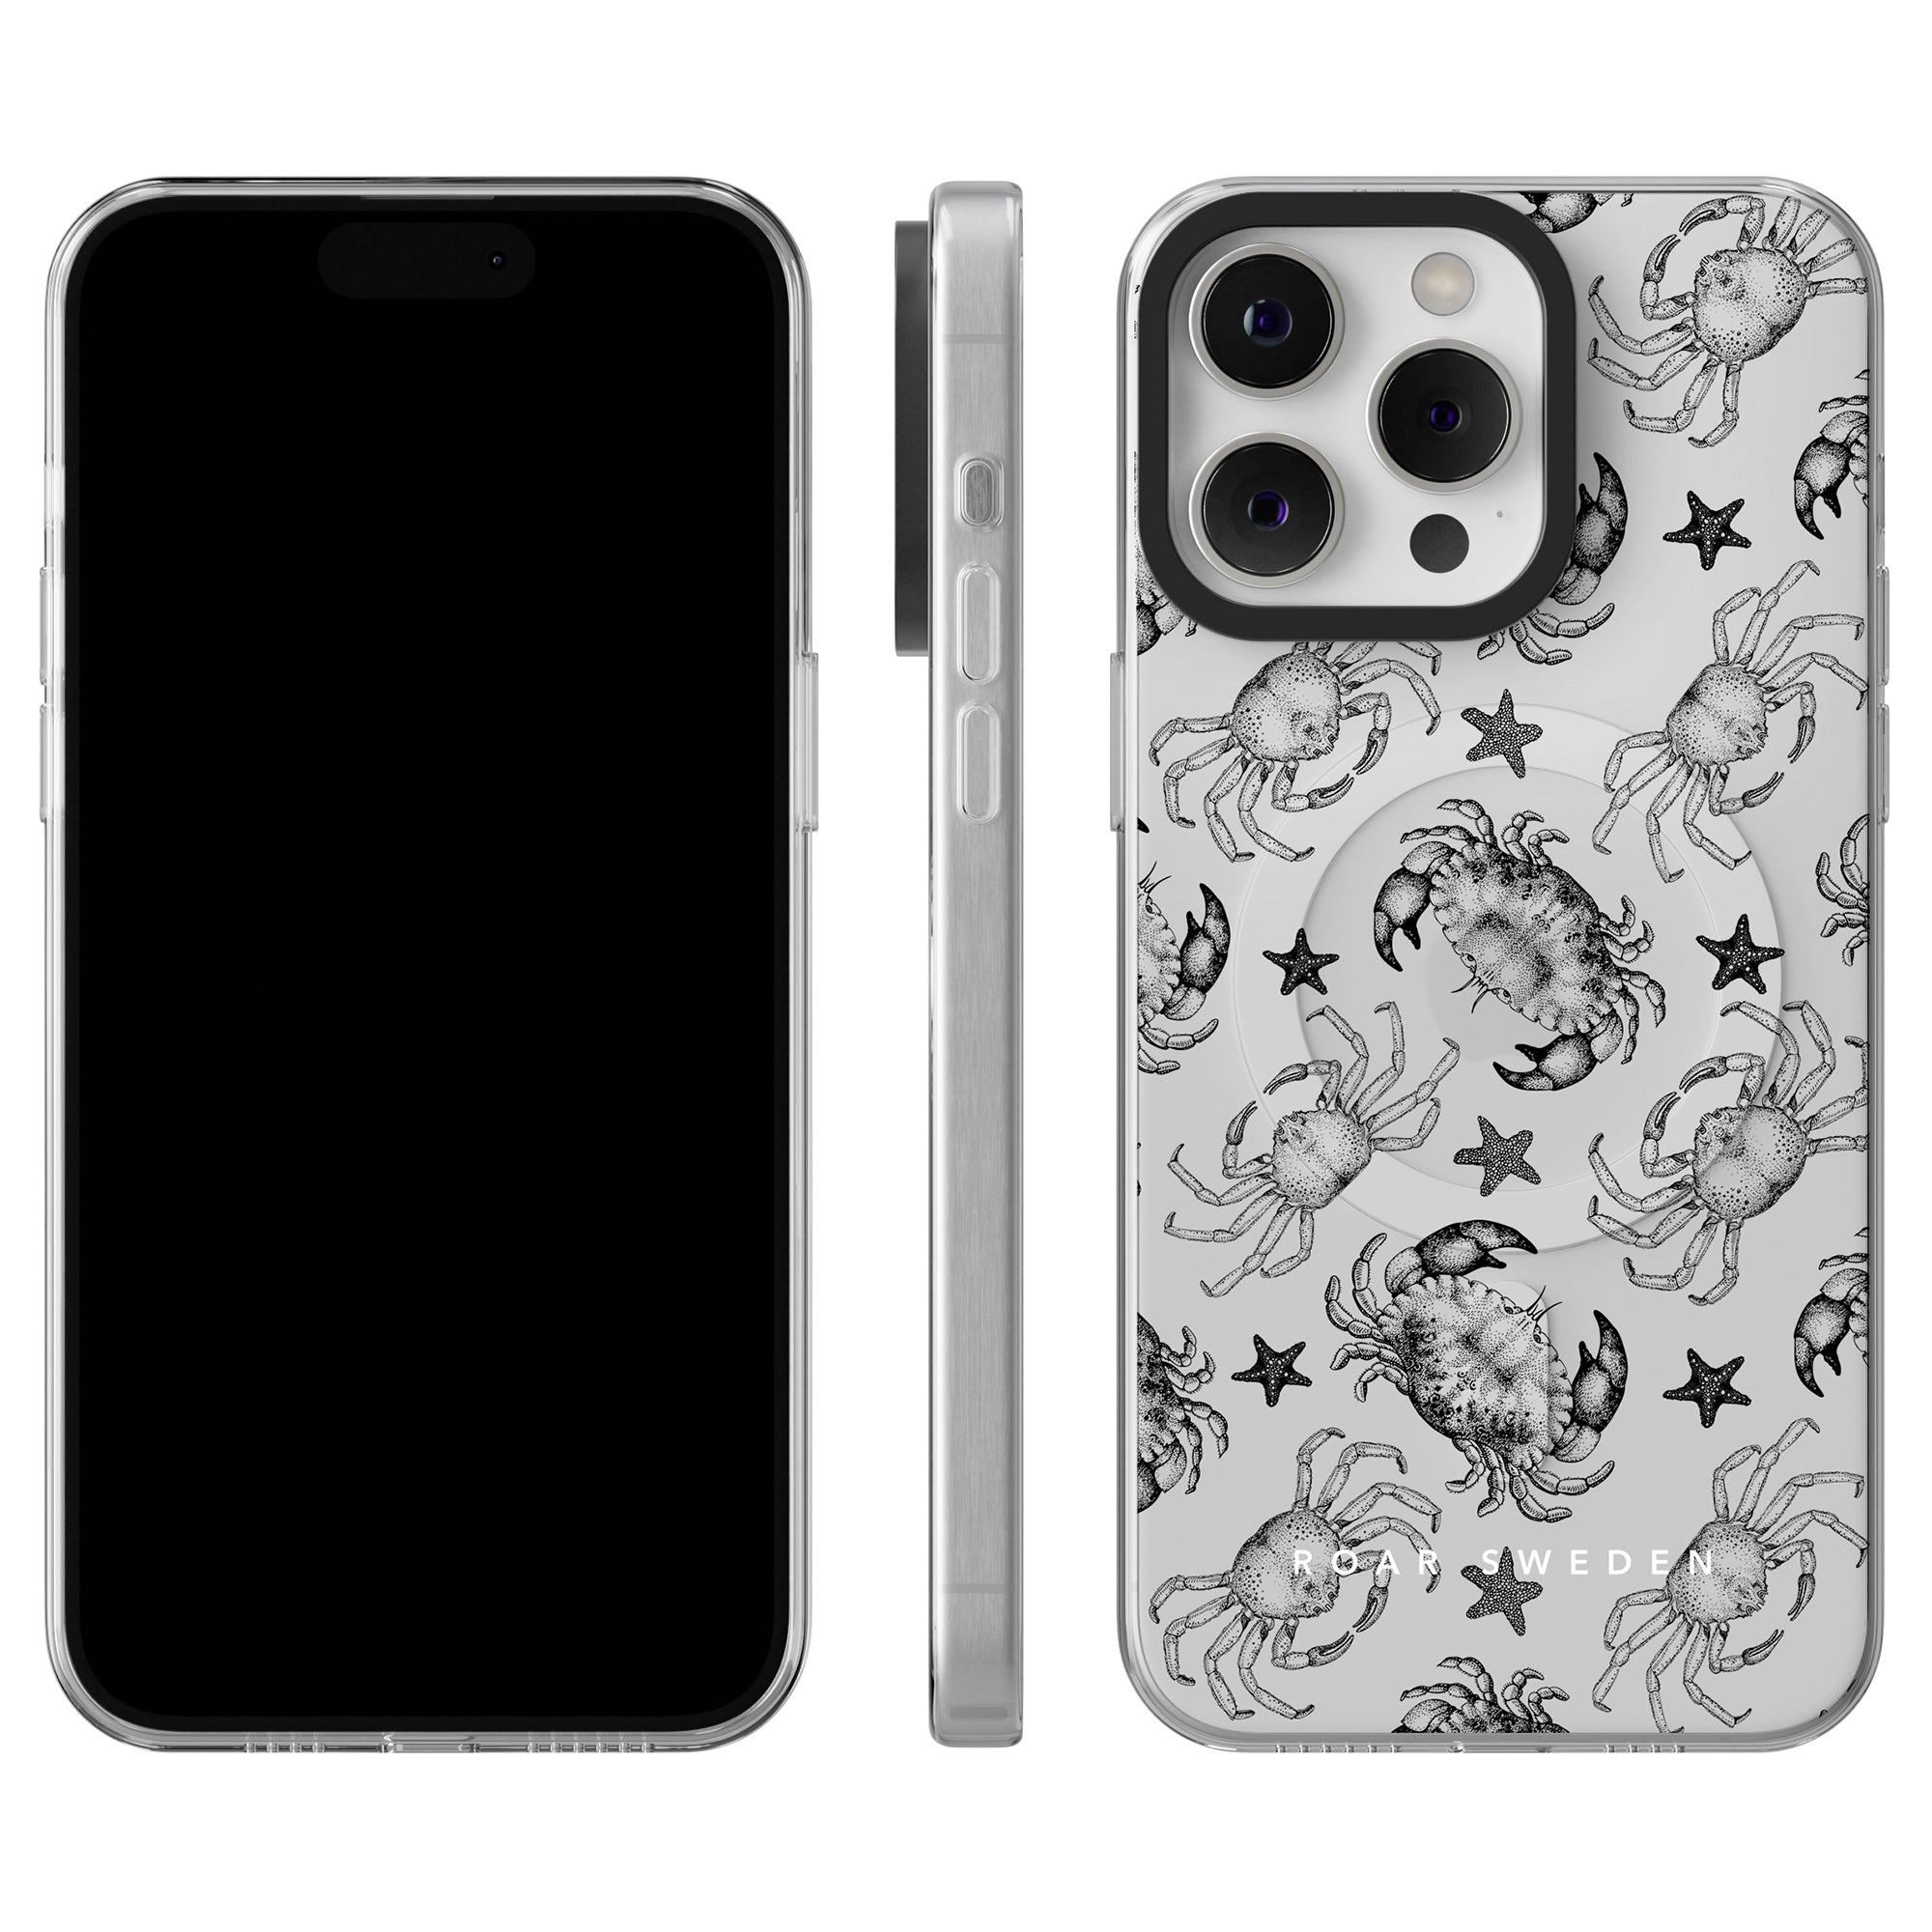 The image showcases three views of a smartphone with a black screen and a stylish phone case from the Ocean Collection. The Black Crab - MagSafe features an eye-catching black and white crab and starfish design, including front, side, and back views of this trendy smartphone accessory.